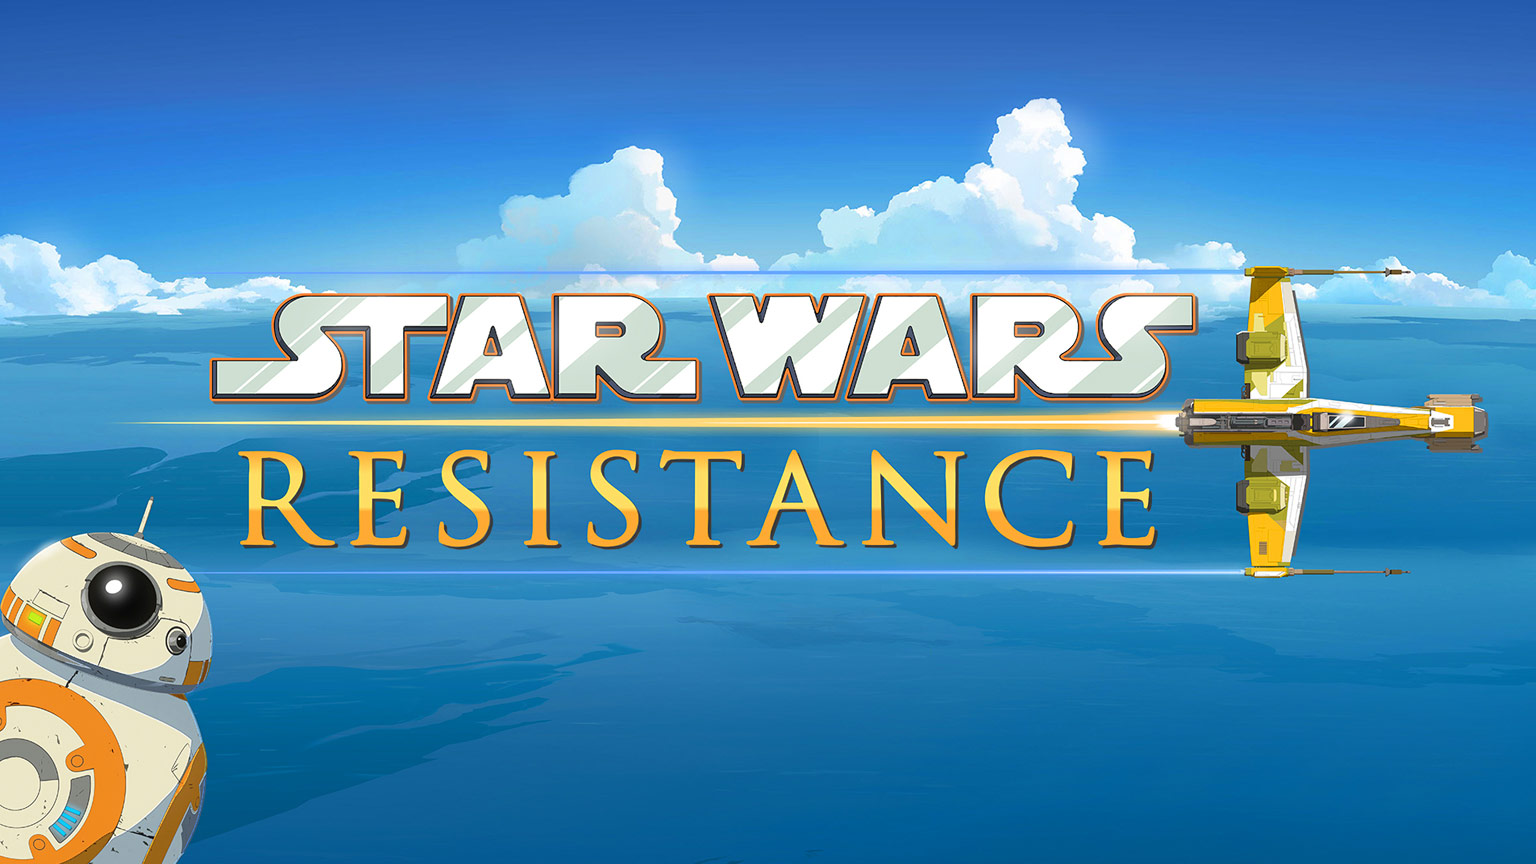 New Series 'Star Wars Resistance' Announced